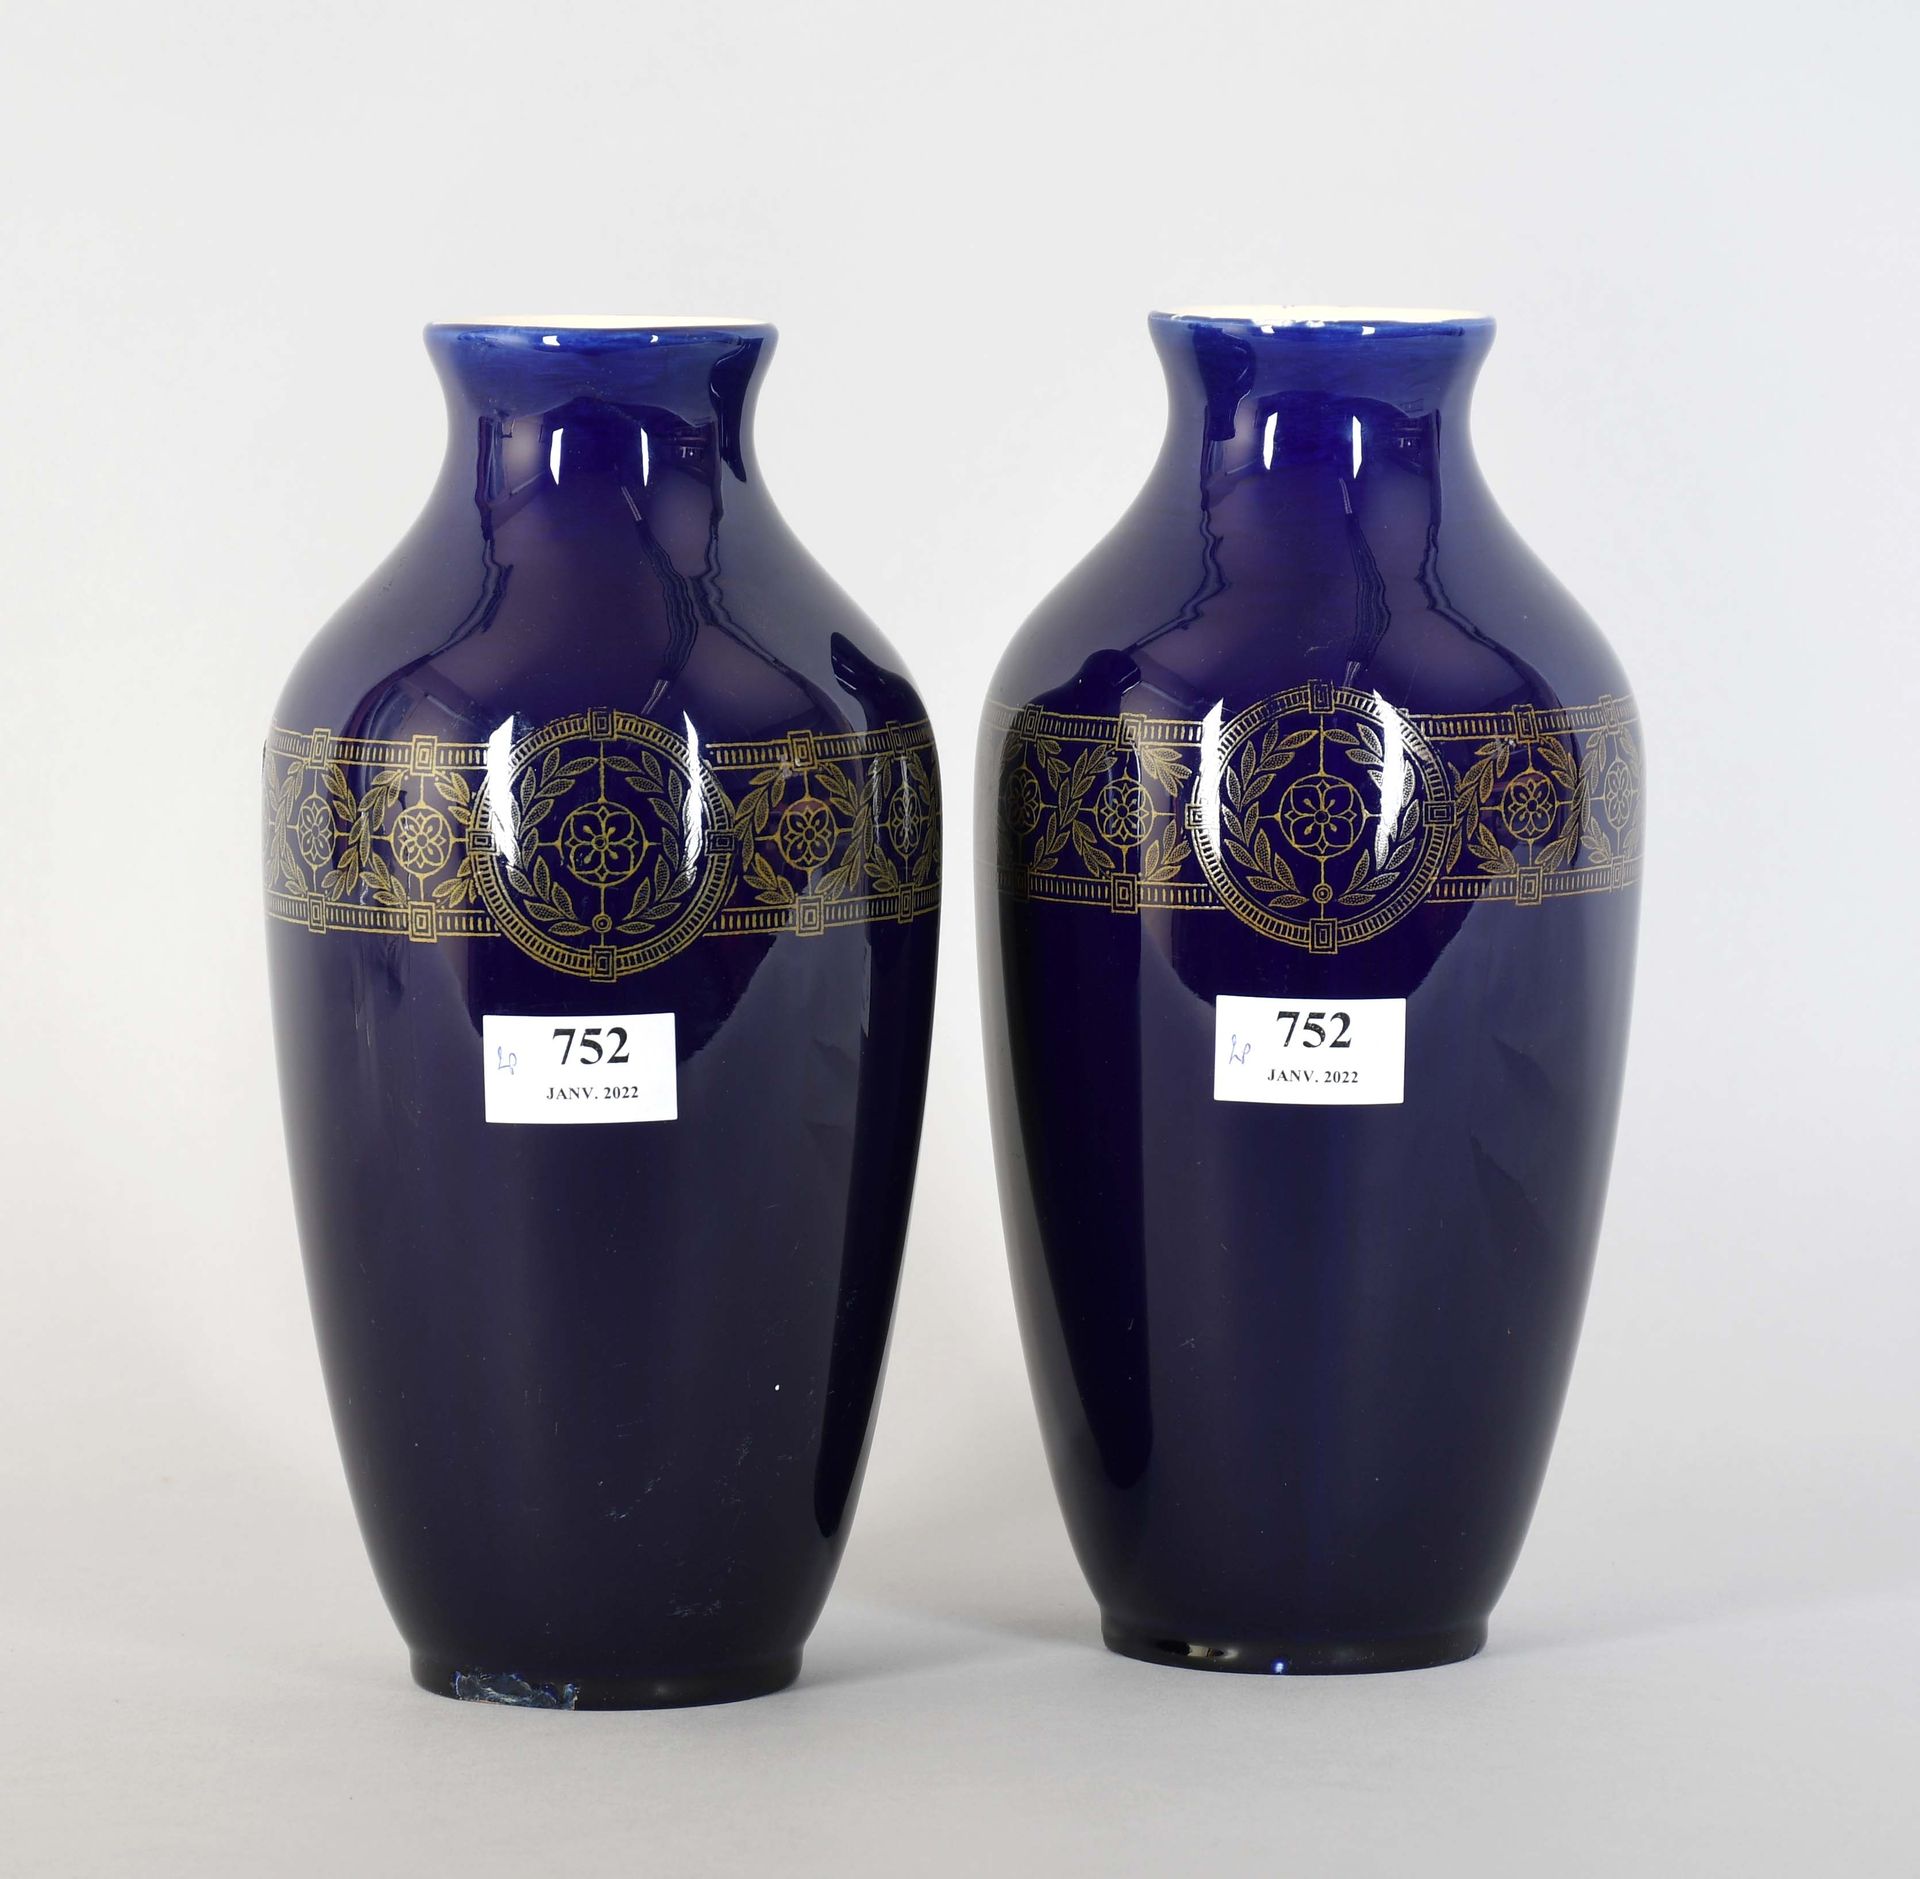 Null Pair of earthenware vases 1900 with blue background and frieze decoration

&hellip;